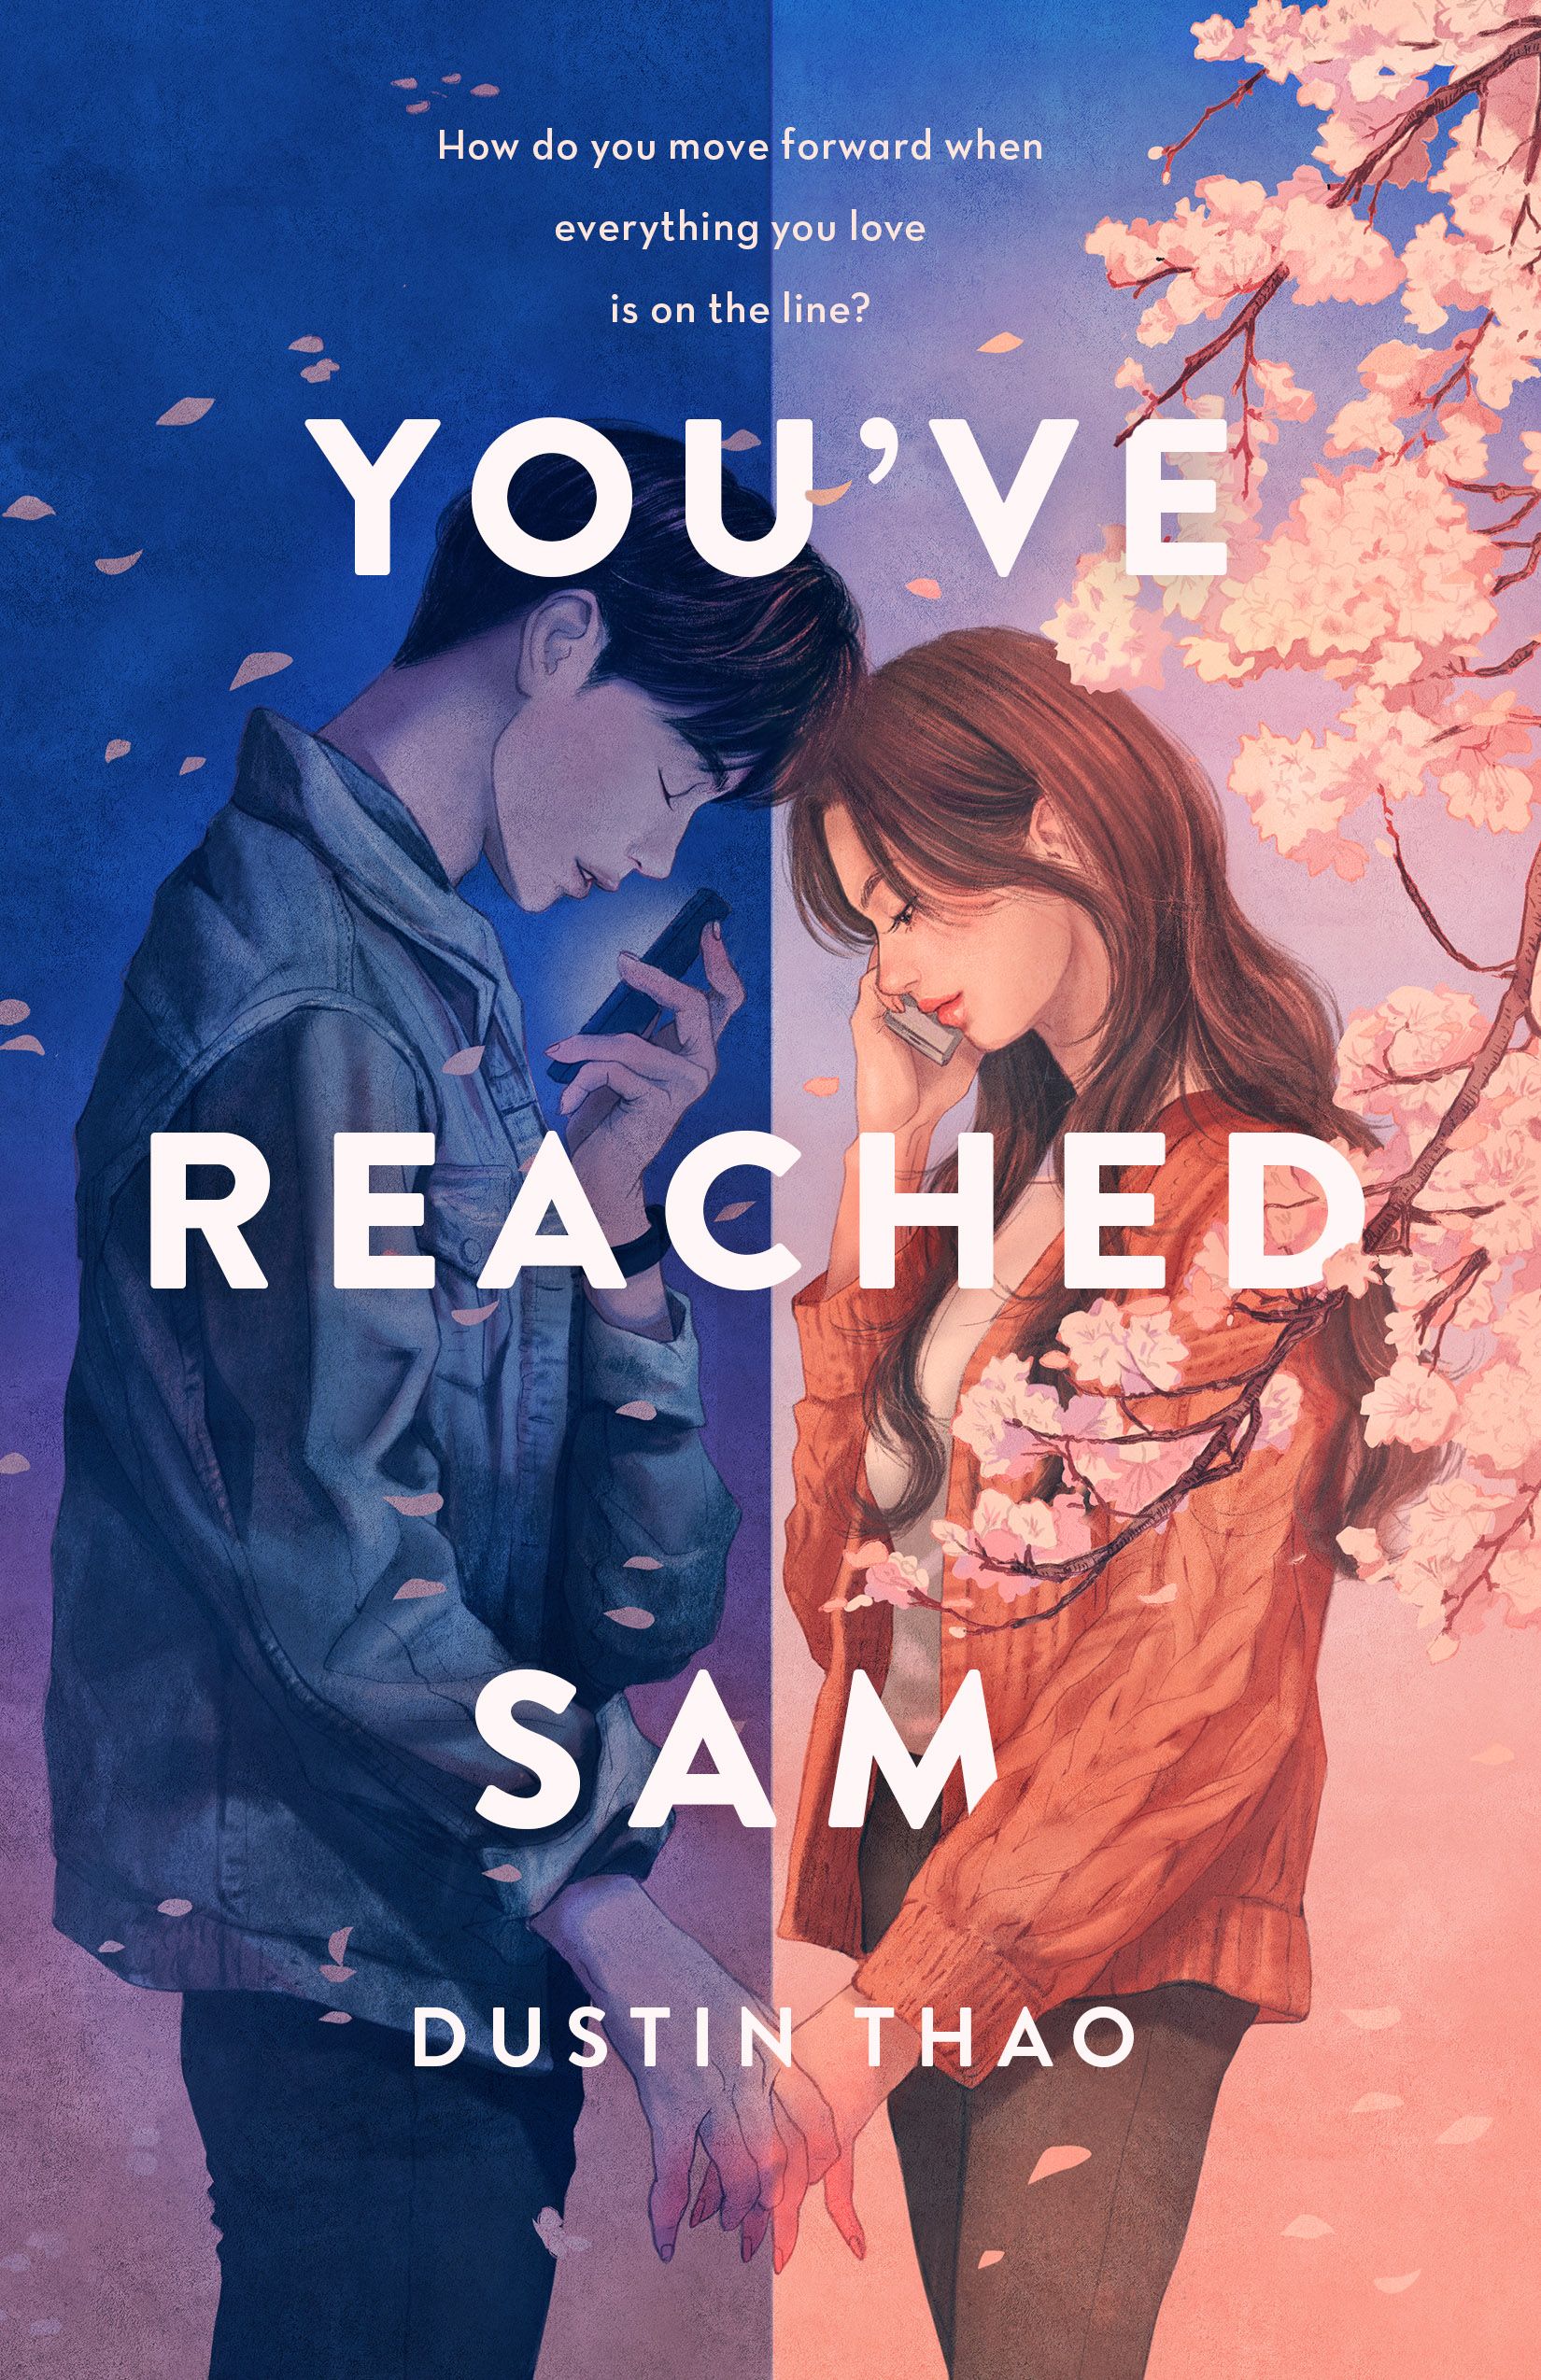 Cover image of "You've Reached Sam" by Dustin Thao.